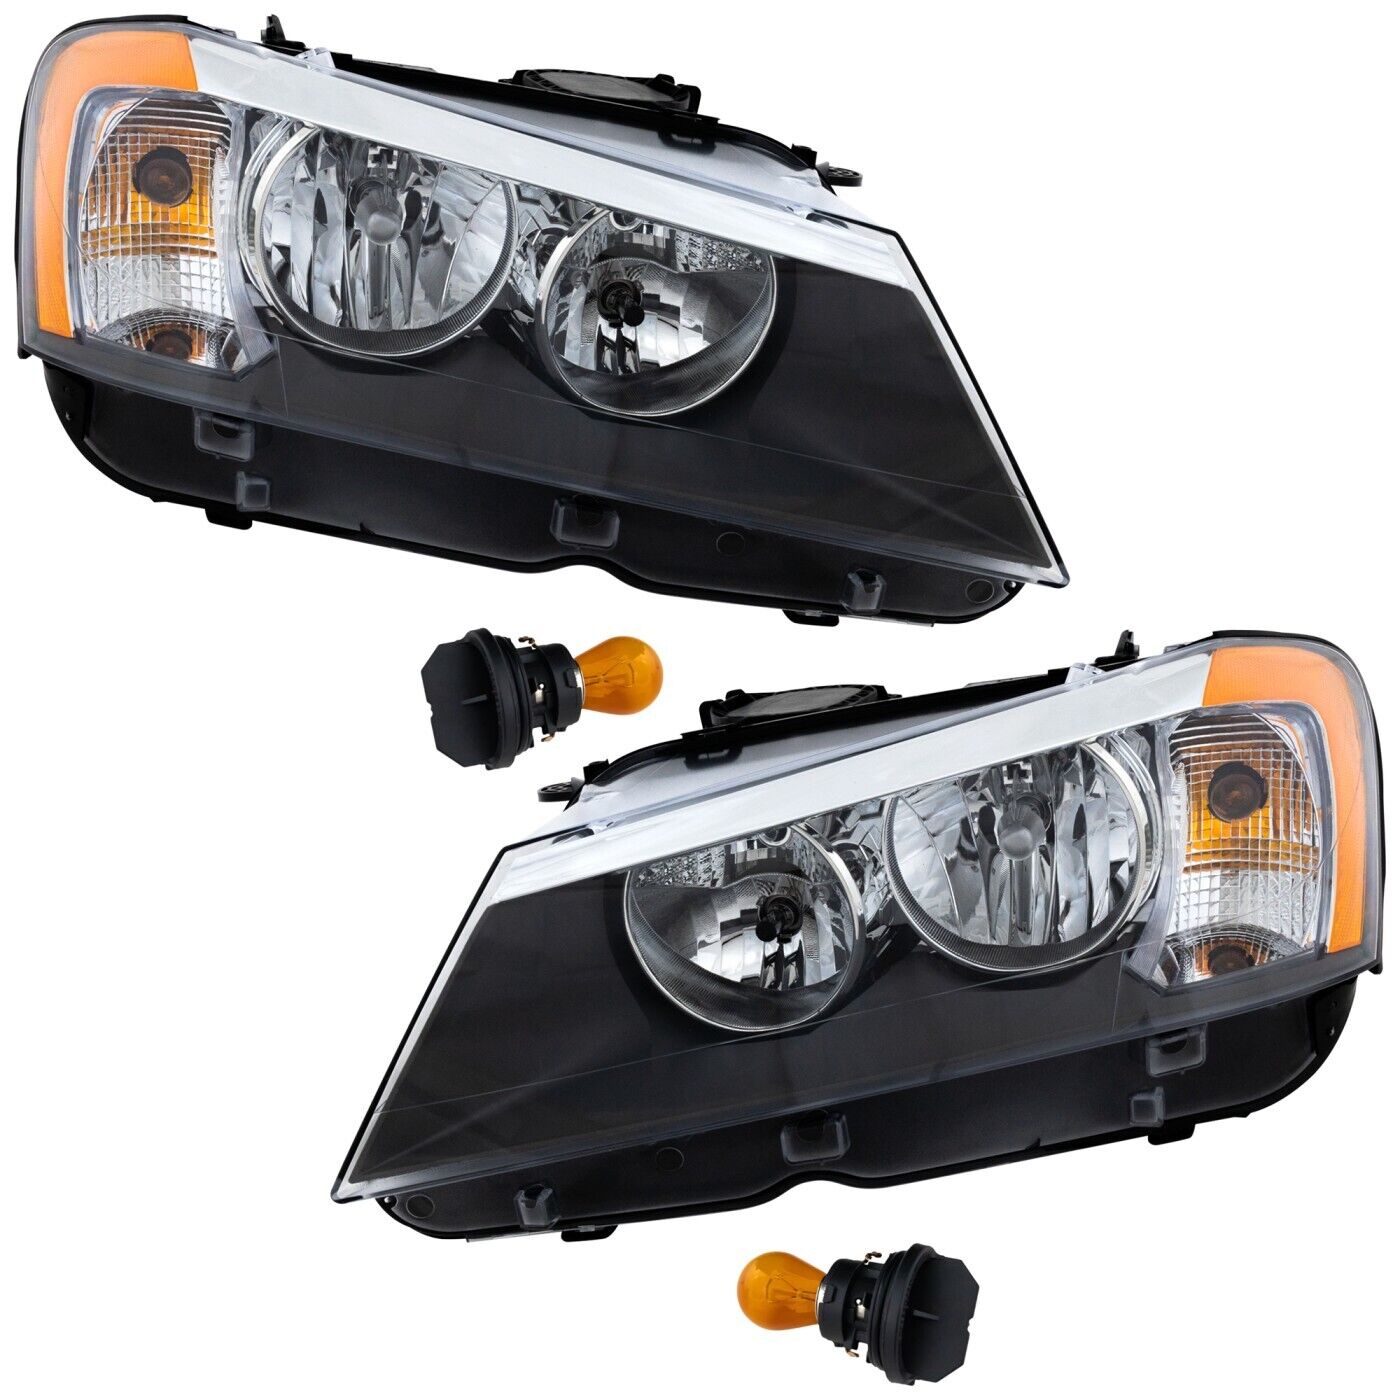 Headlight Set For 2011 2012 2013 2014 BMW X3 Left and Right With Bulb 2Pc